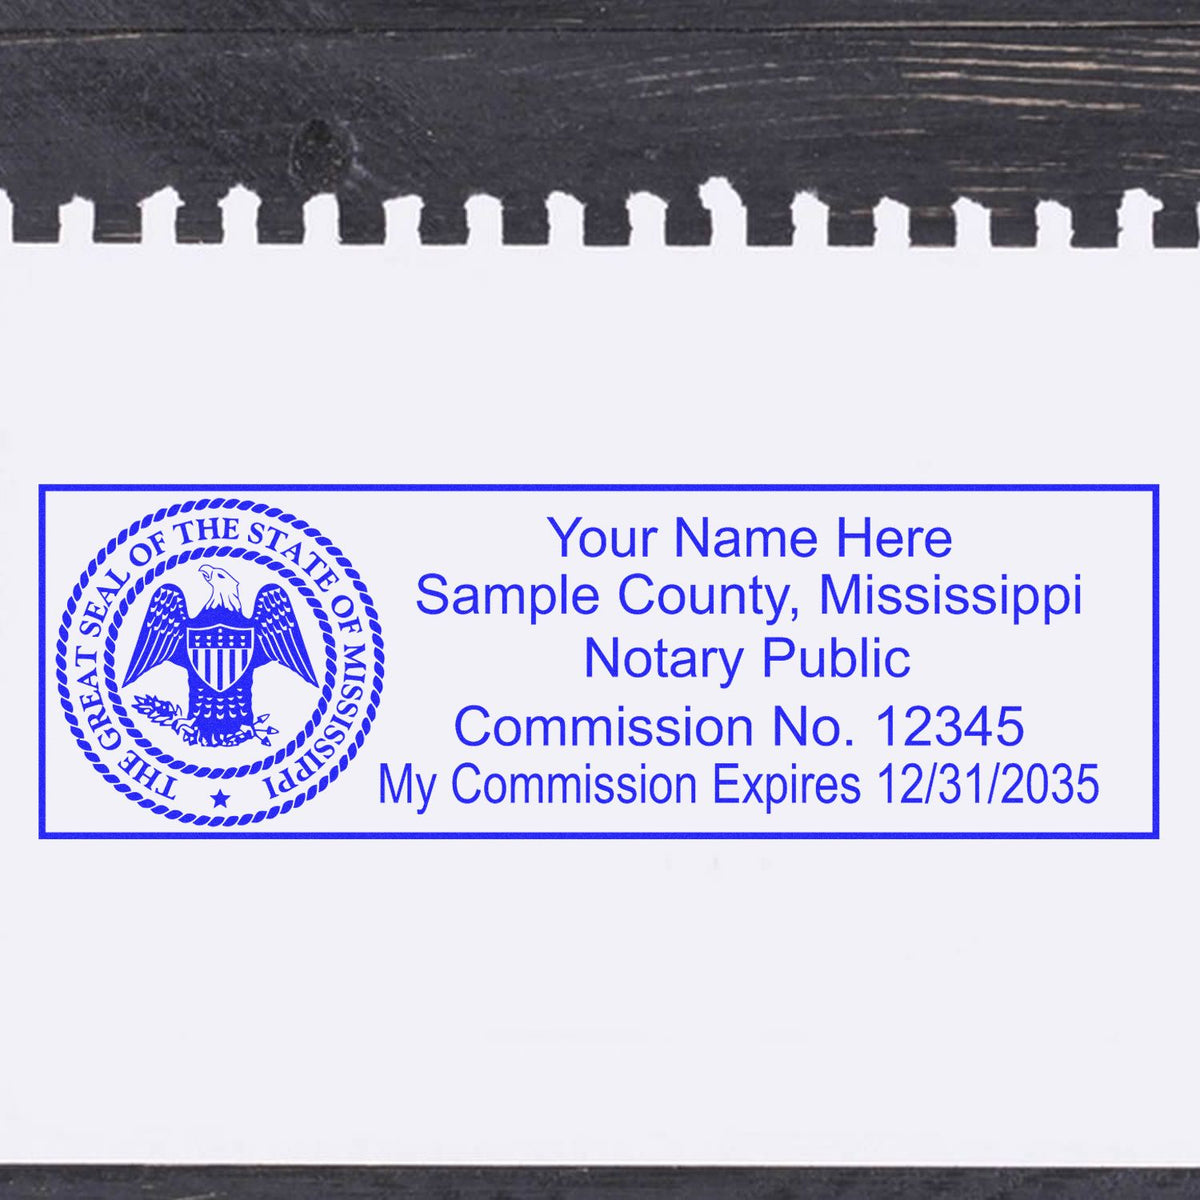 This paper is stamped with a sample imprint of the Slim Pre-Inked State Seal Notary Stamp for Mississippi, signifying its quality and reliability.